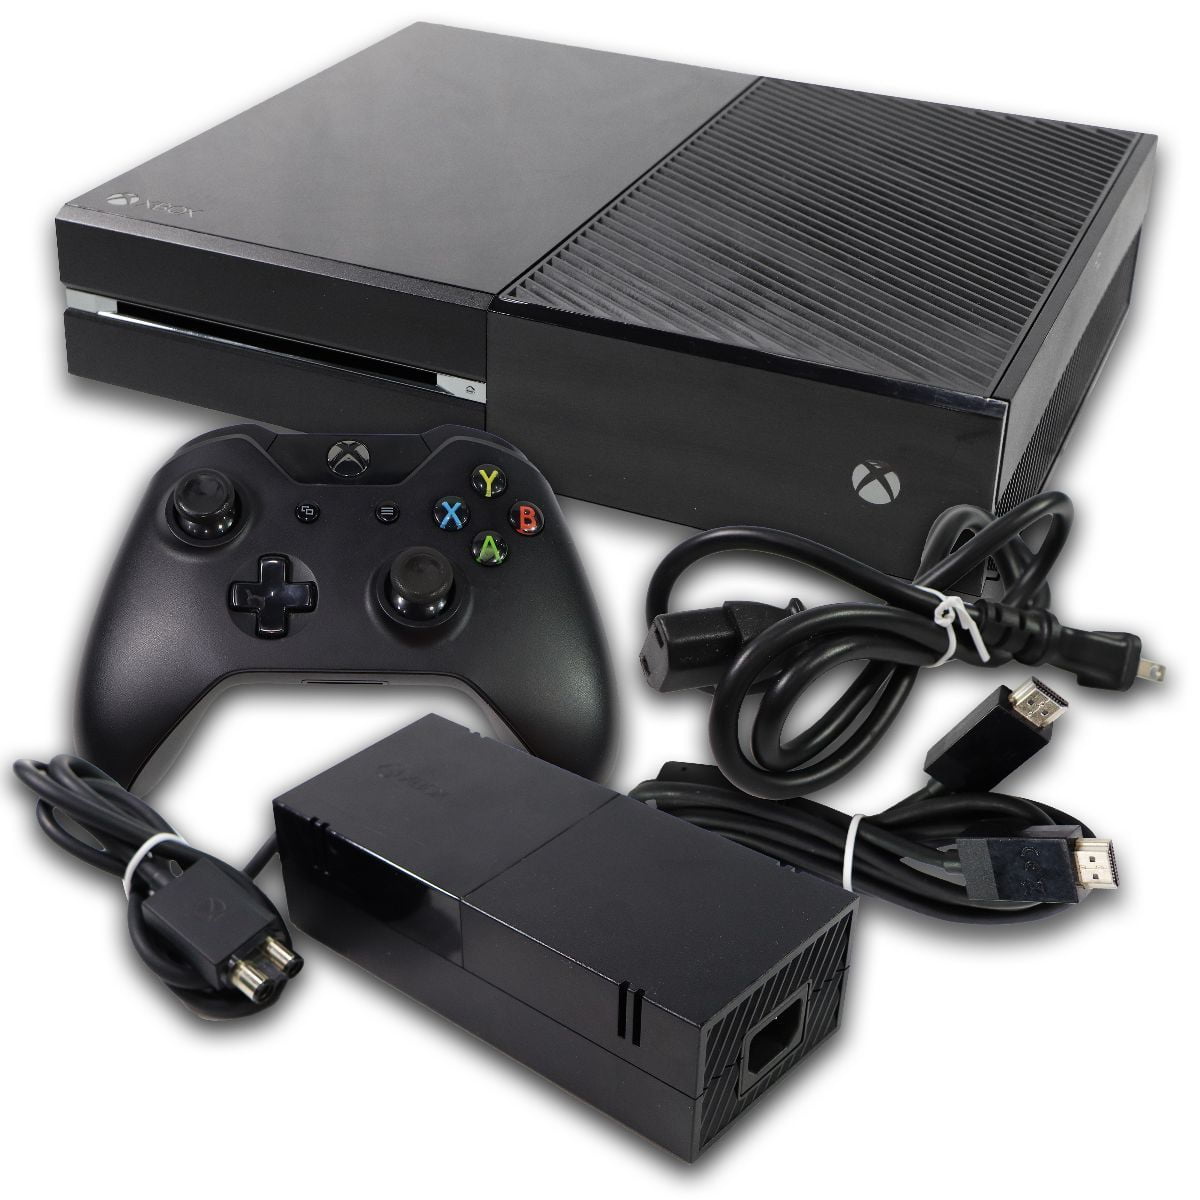 Microsoft Xbox One 1TB Console with Controller - Black (1540 